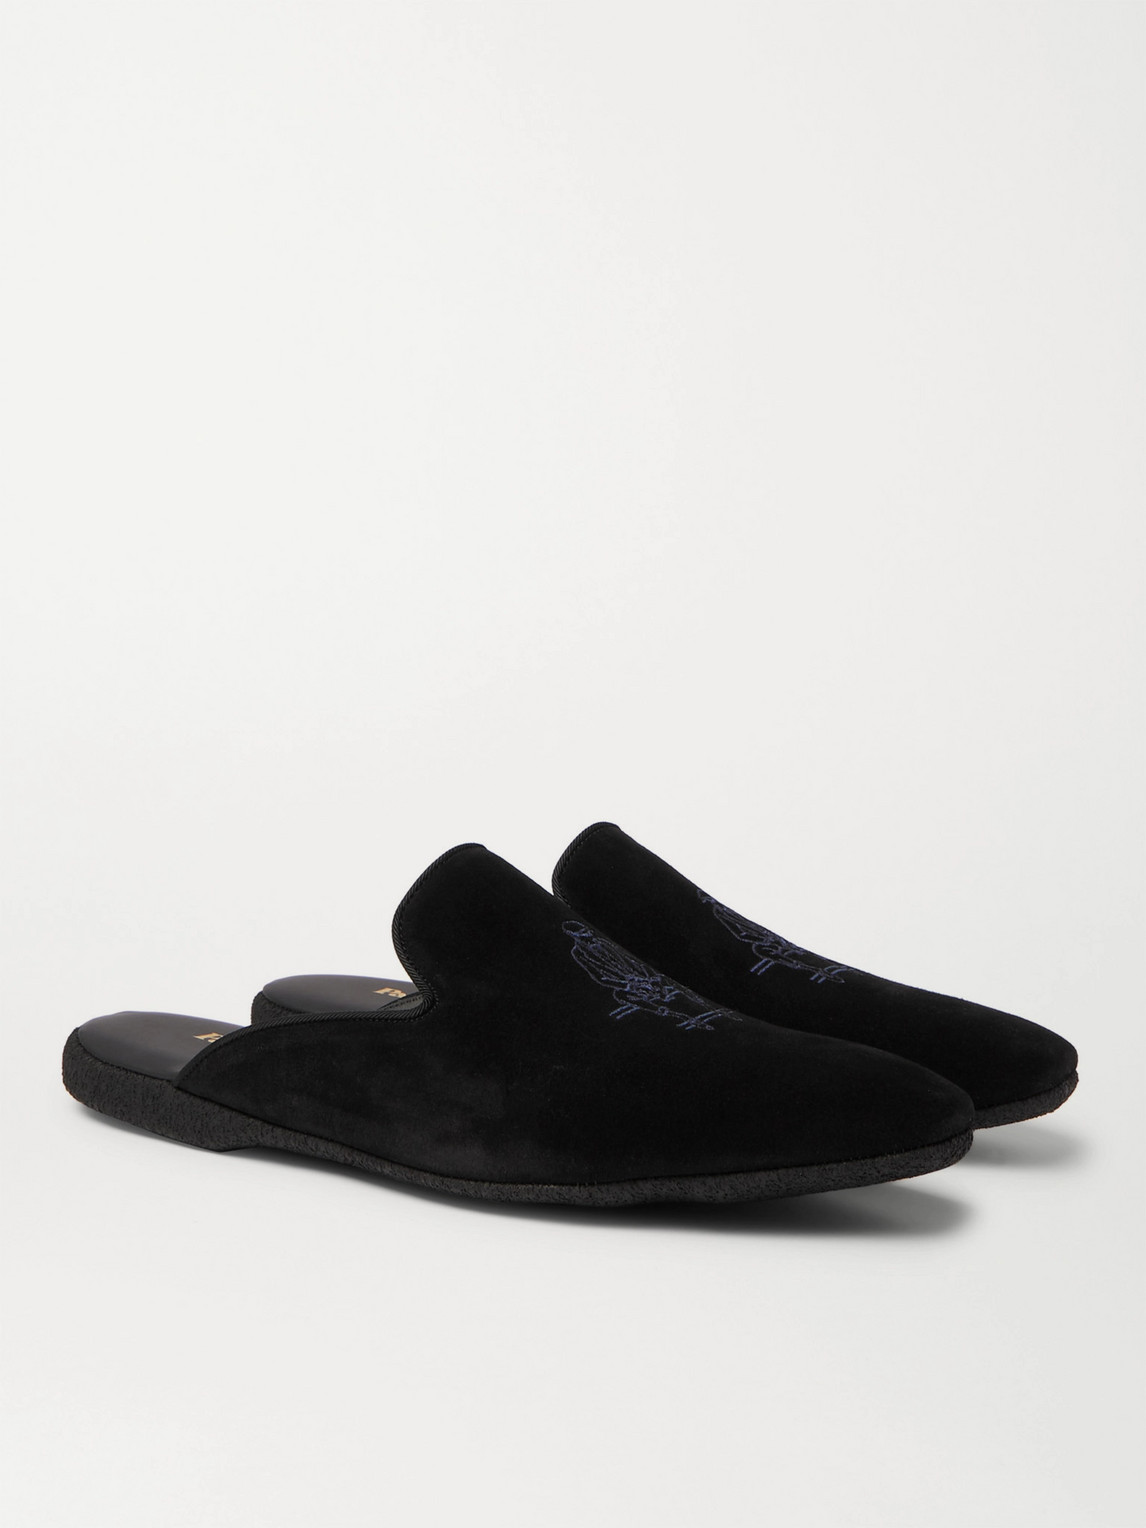 Paul Stuart Hamilton Embroidered Suede Slippers In Black